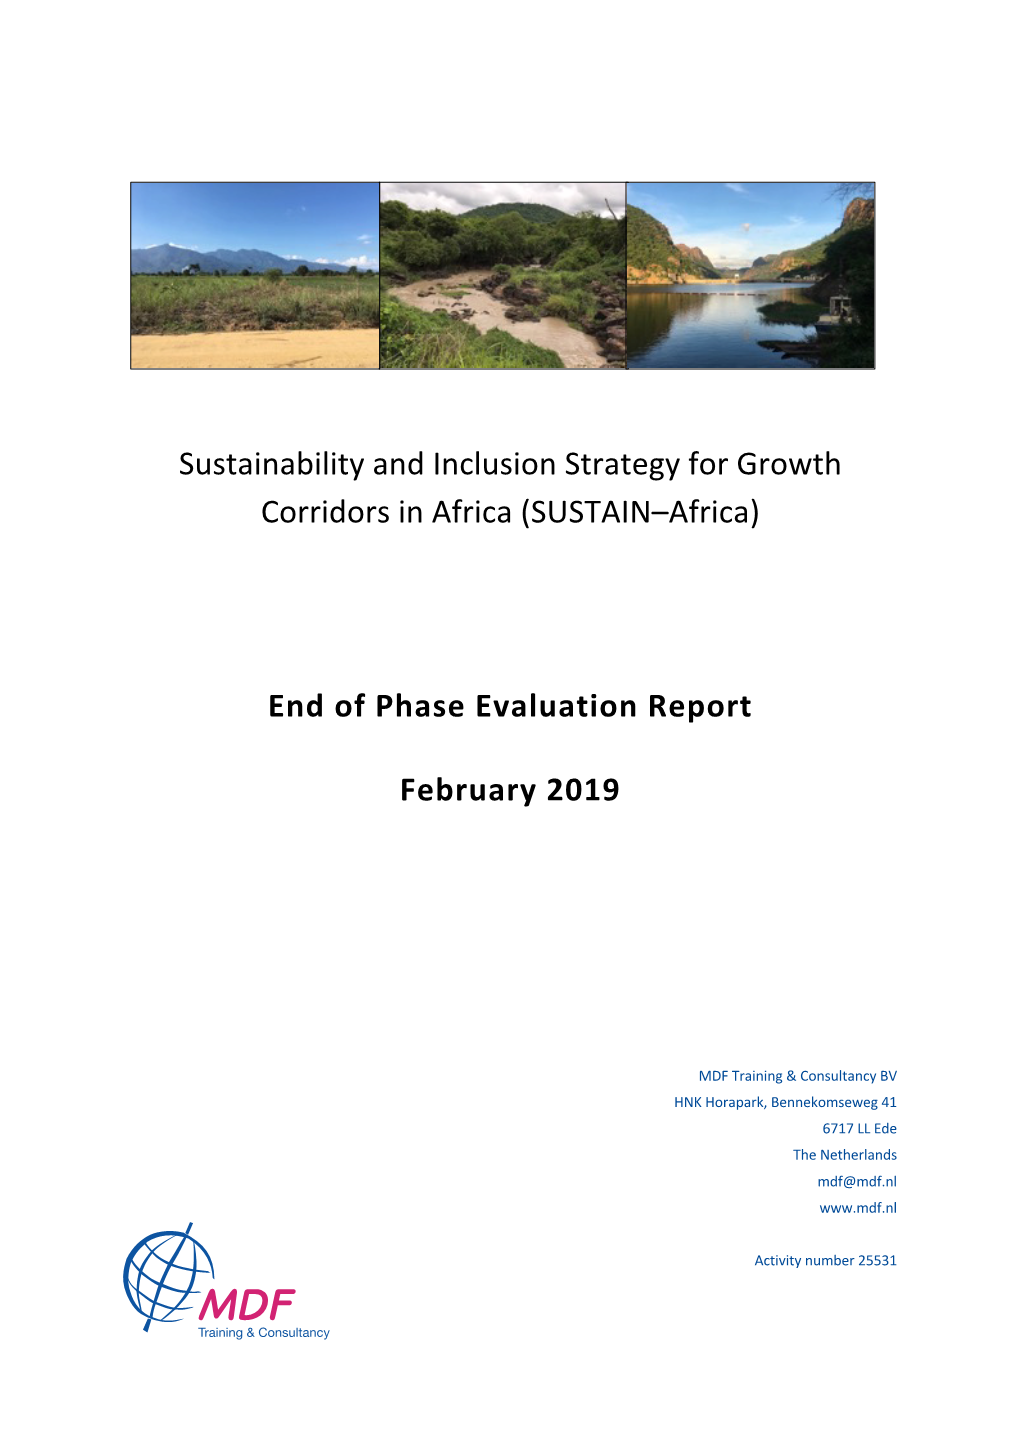 Sustainability and Inclusion Strategy for Growth Corridors in Africa (SUSTAIN–Africa)